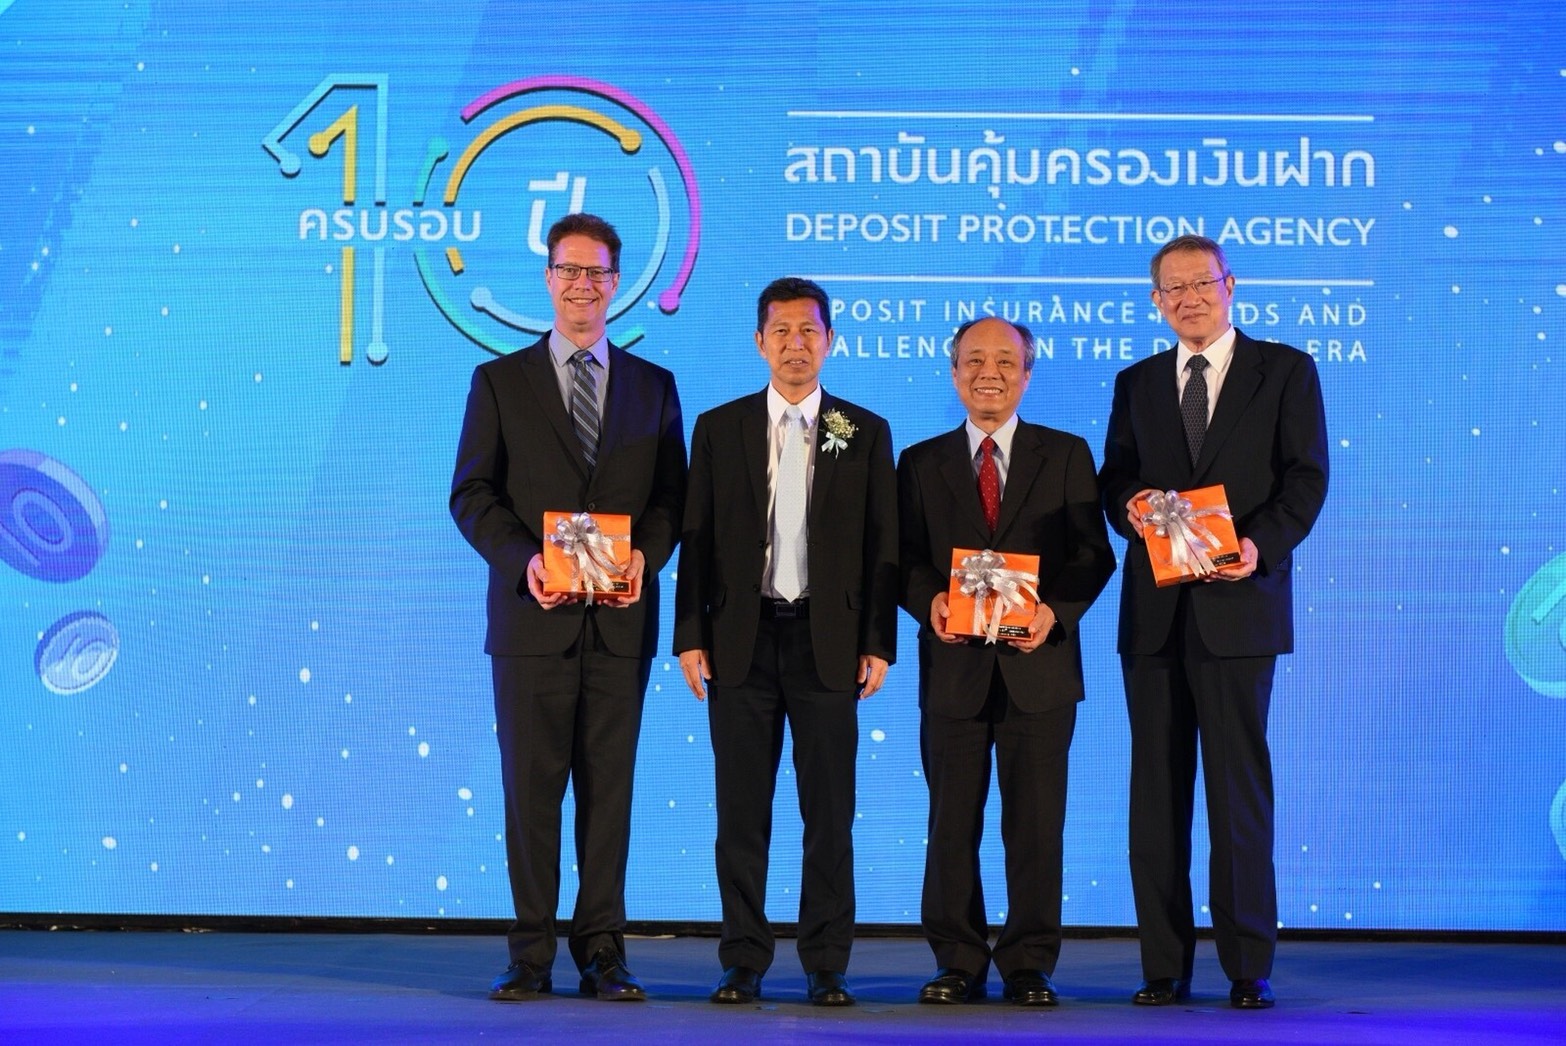 Photo of CDIC President Michael Lin (right) as a speaker of the second session “Deposit Insurance and the Digital Era: Why, How, and for Whom”of the seminar hosted by the Deposit Protection Agency, Thailand.